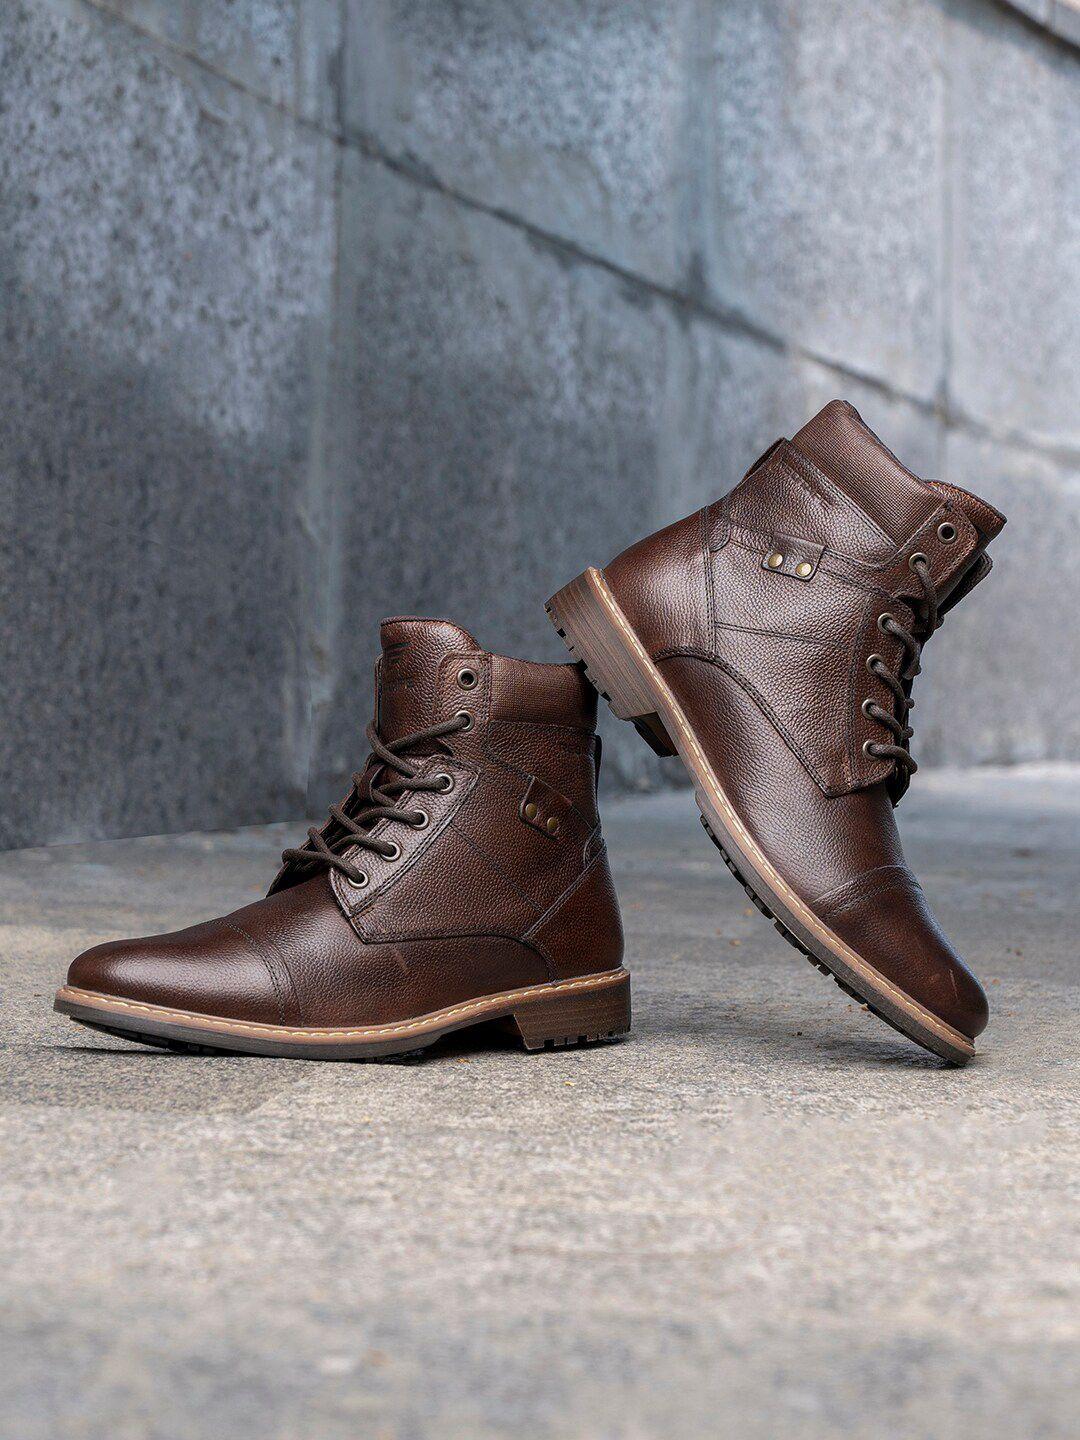 red tape men textured leather anti-slip mid-top biker boots